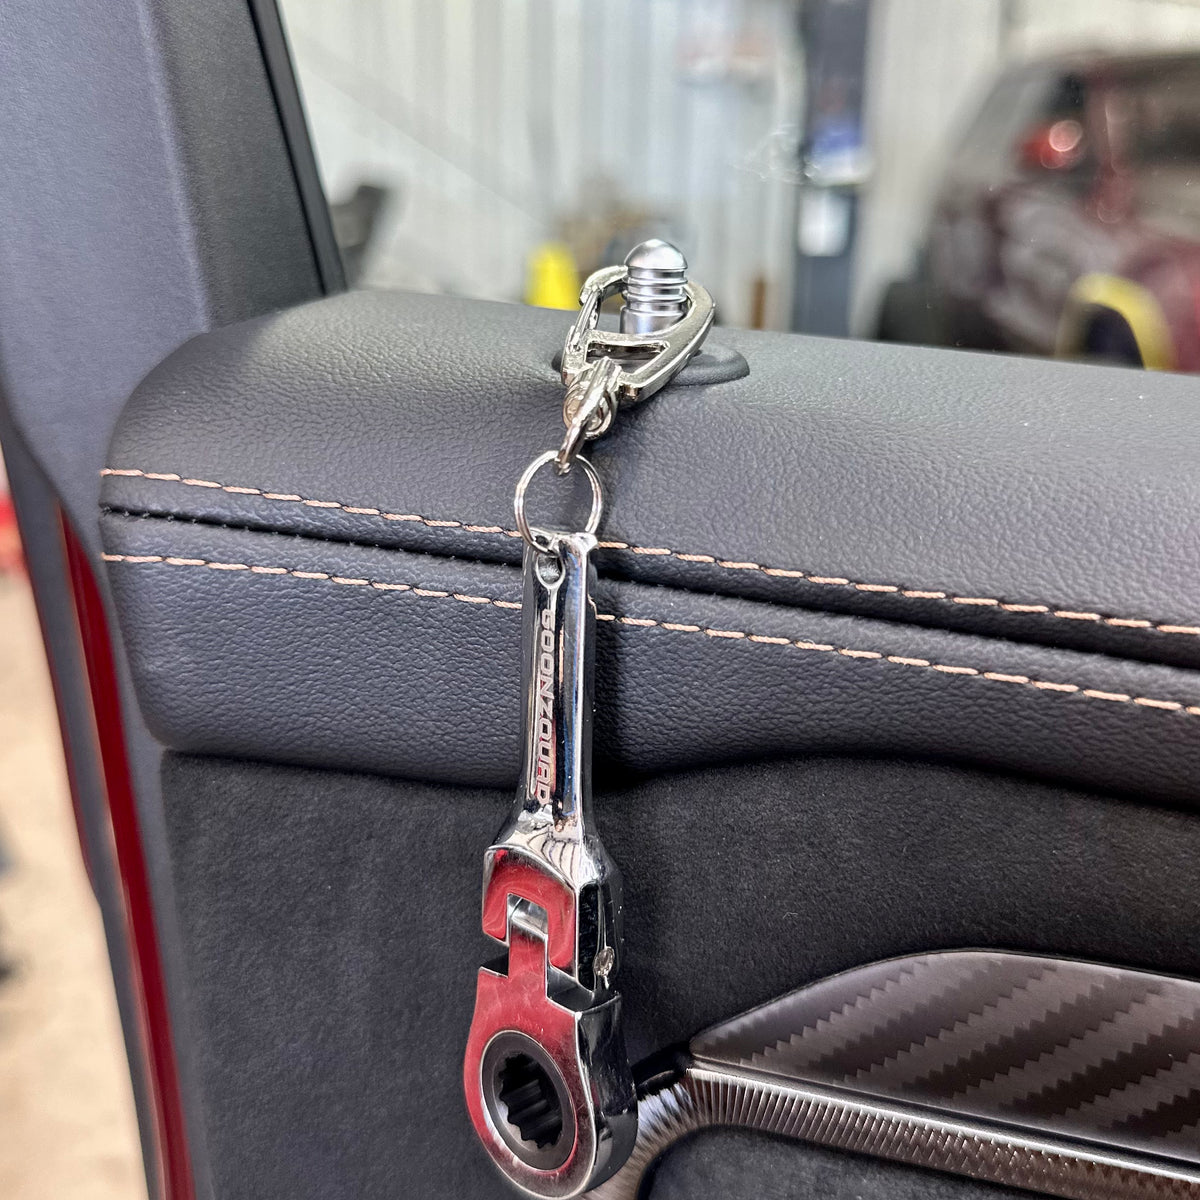 10 mm Ratcheting Wrench Keychain